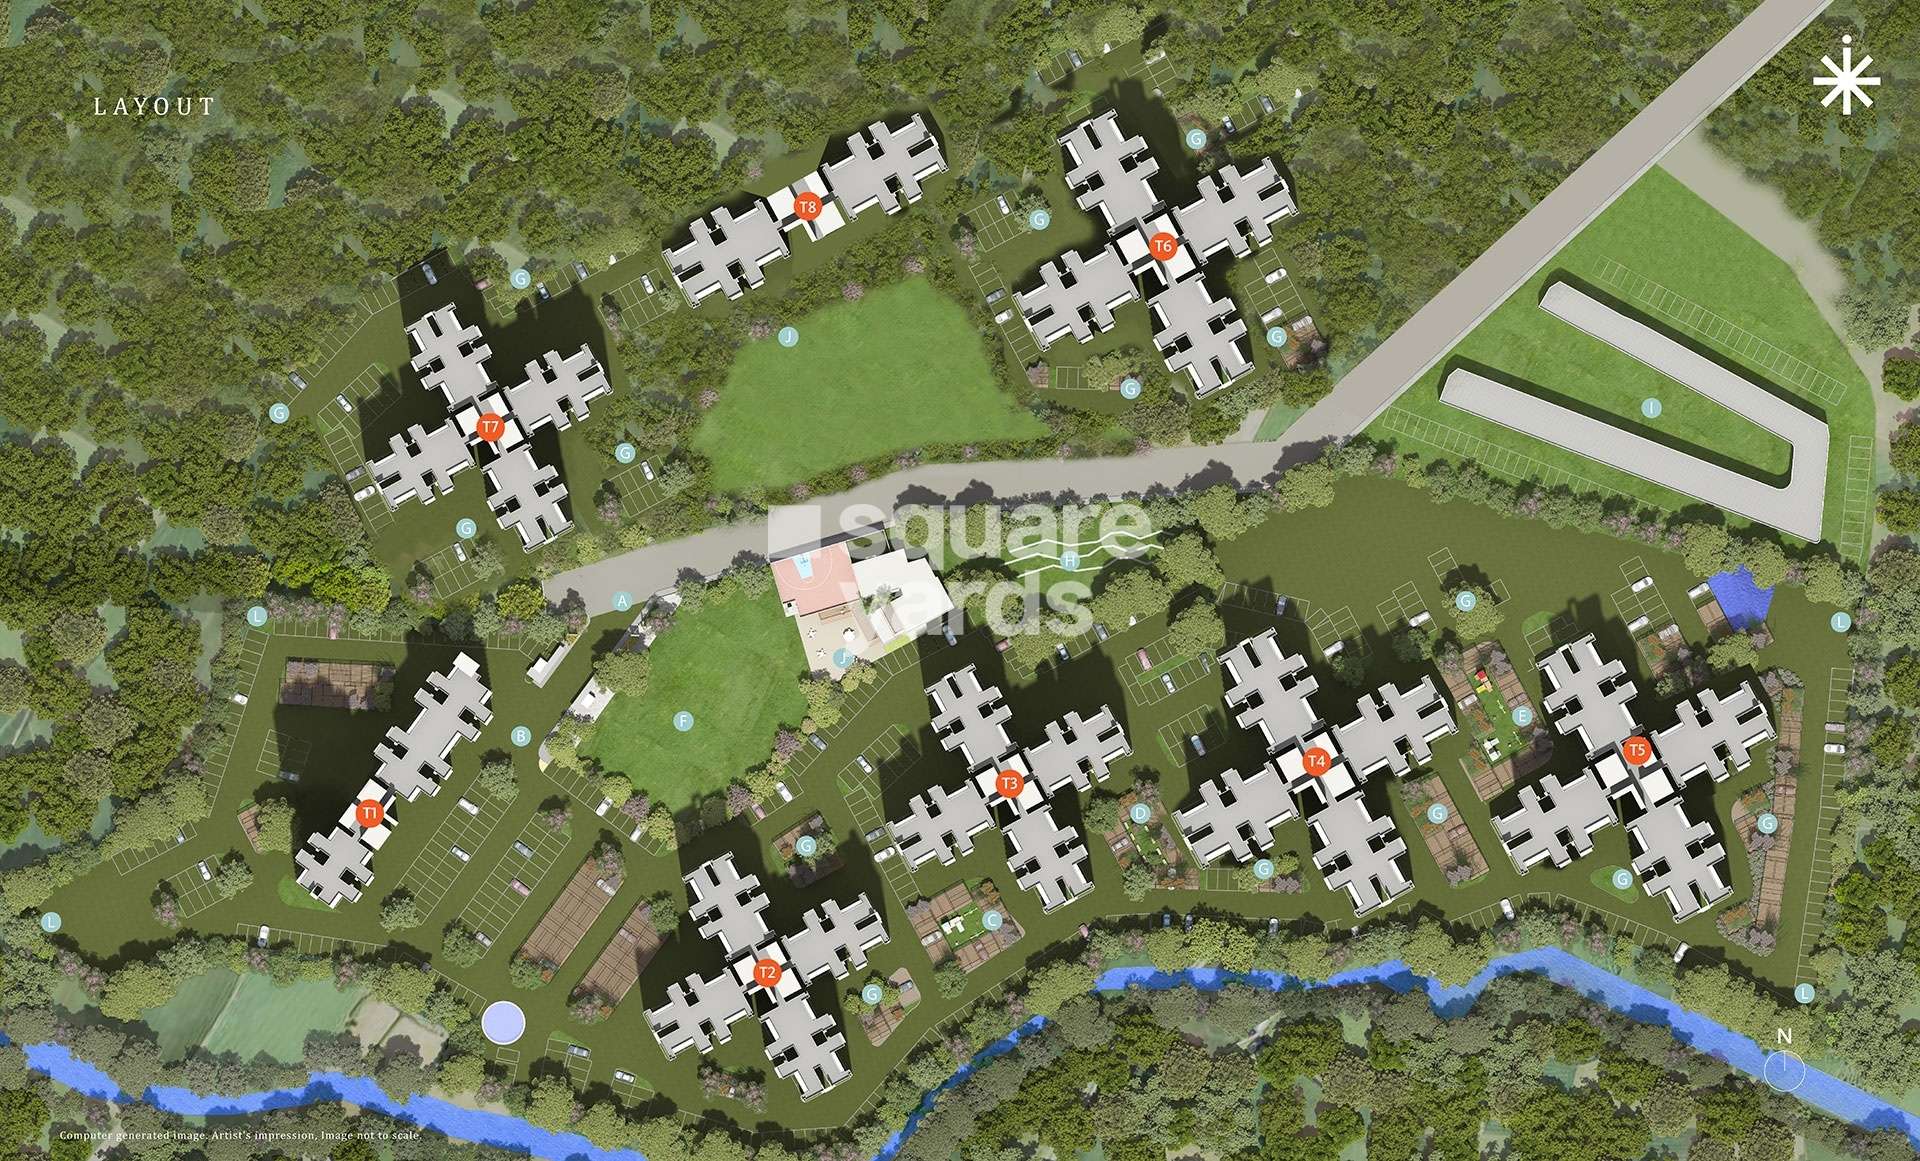 skyi star town phase 4 project master plan image1